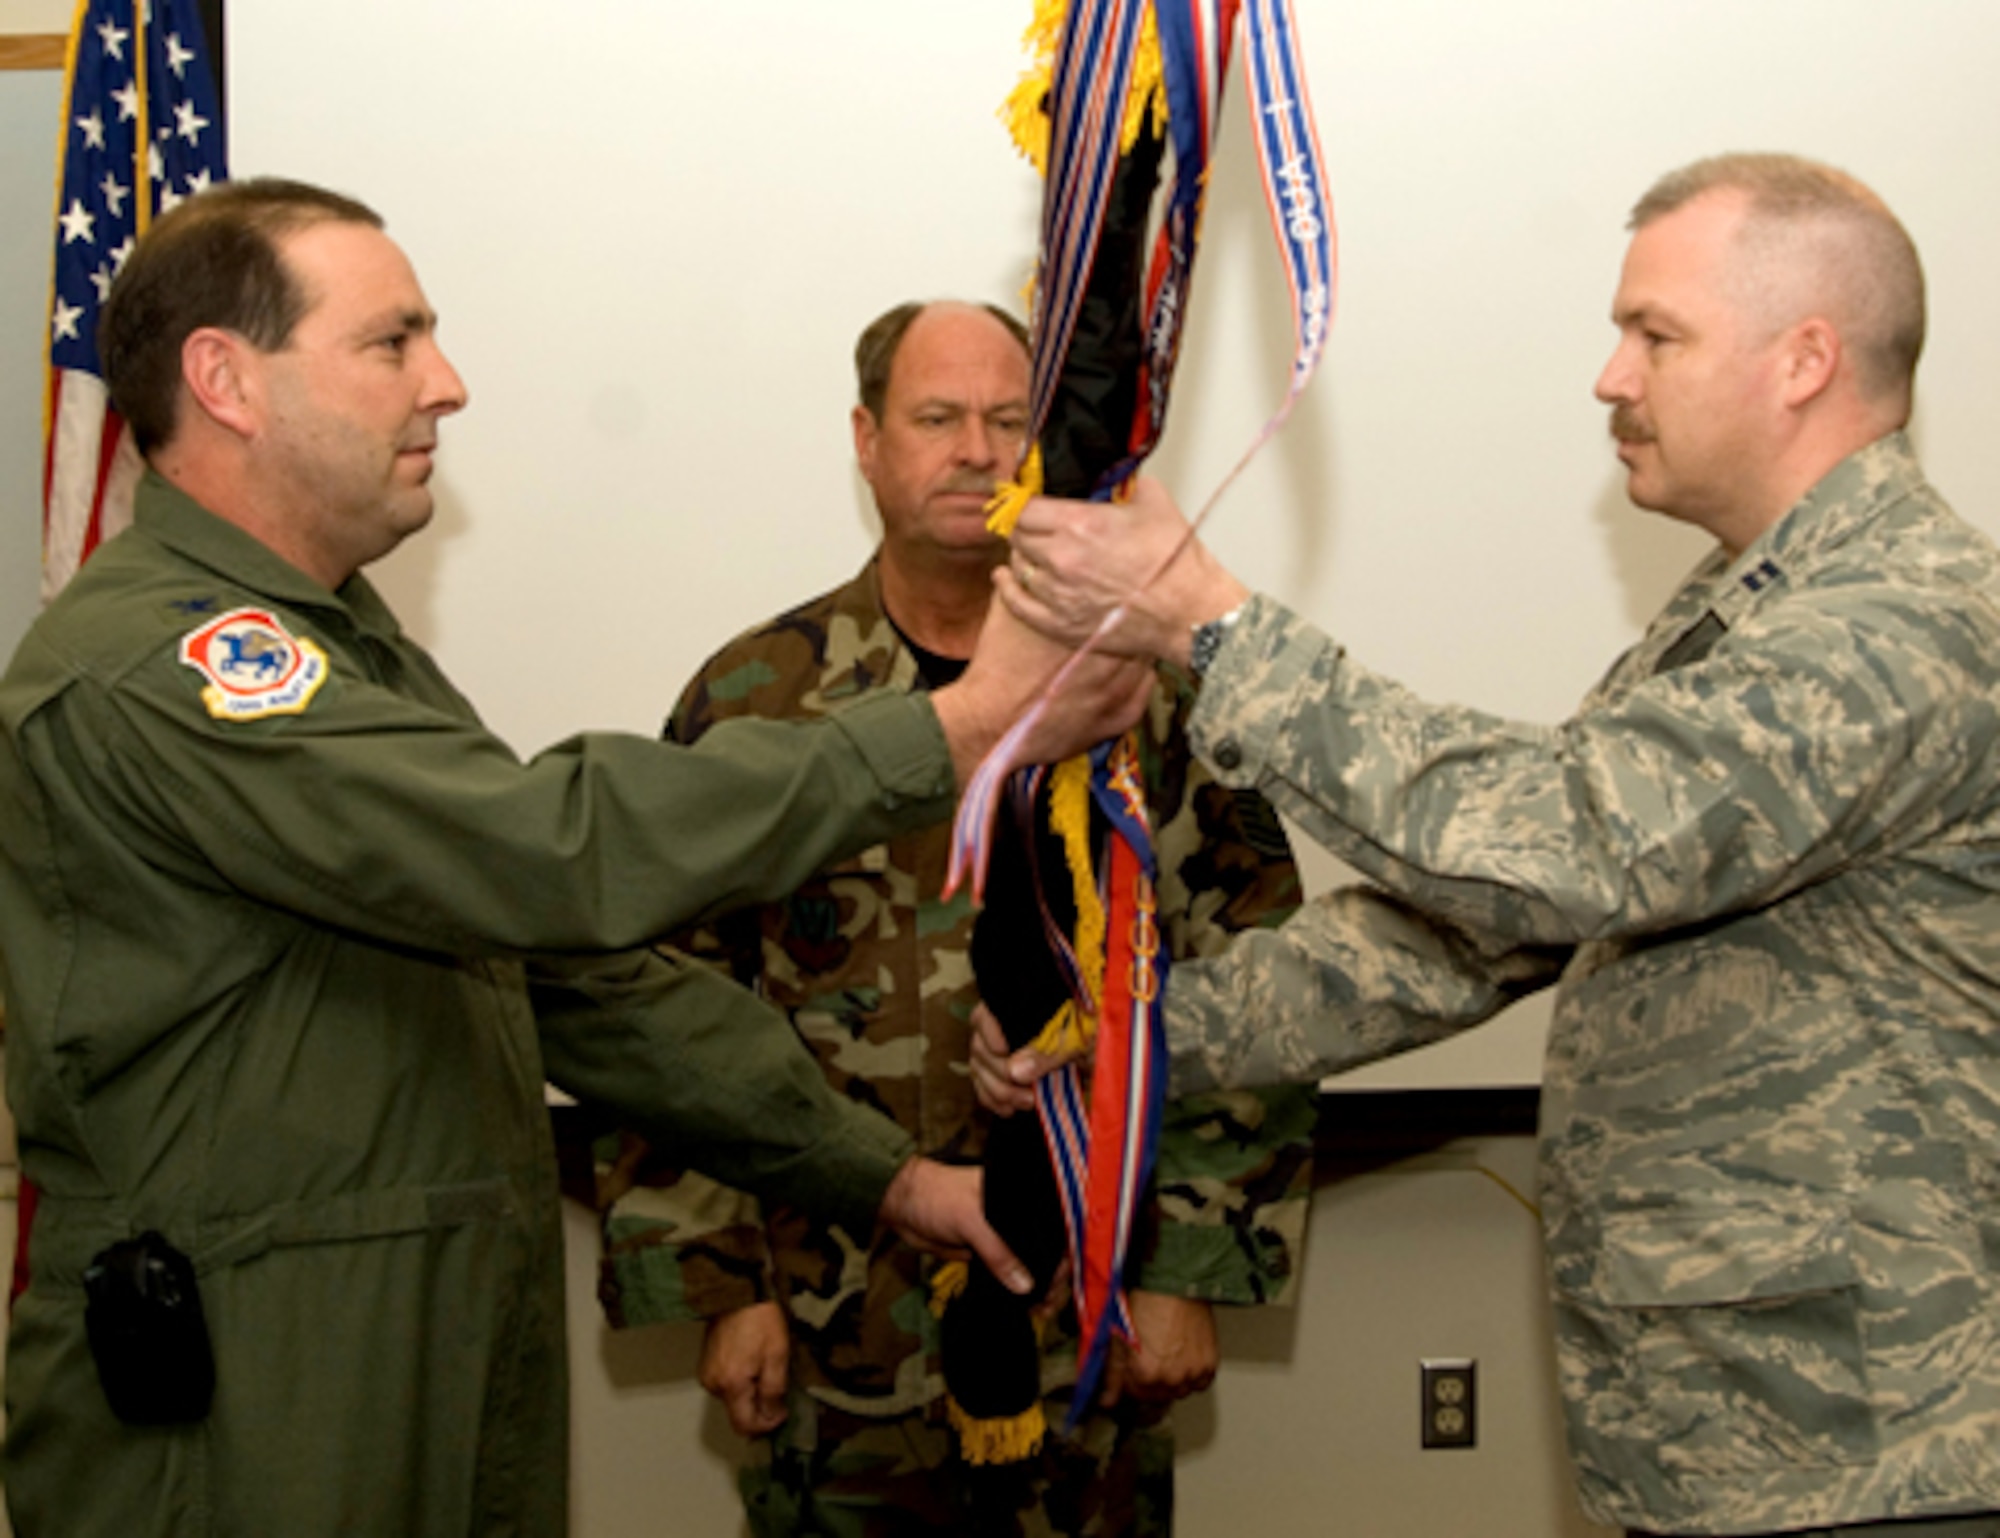 Captain John Howie accepts command of the 241st Air Traffic Control Squadron from Colonel Ralph Schwader, 139th Airlift Wing, 180th Group Commander, at Rosecrans Airport on January 10, 2009. (U.S. Air Force photo by Tech. Sgt. Shannon Bond) (RELEASED)